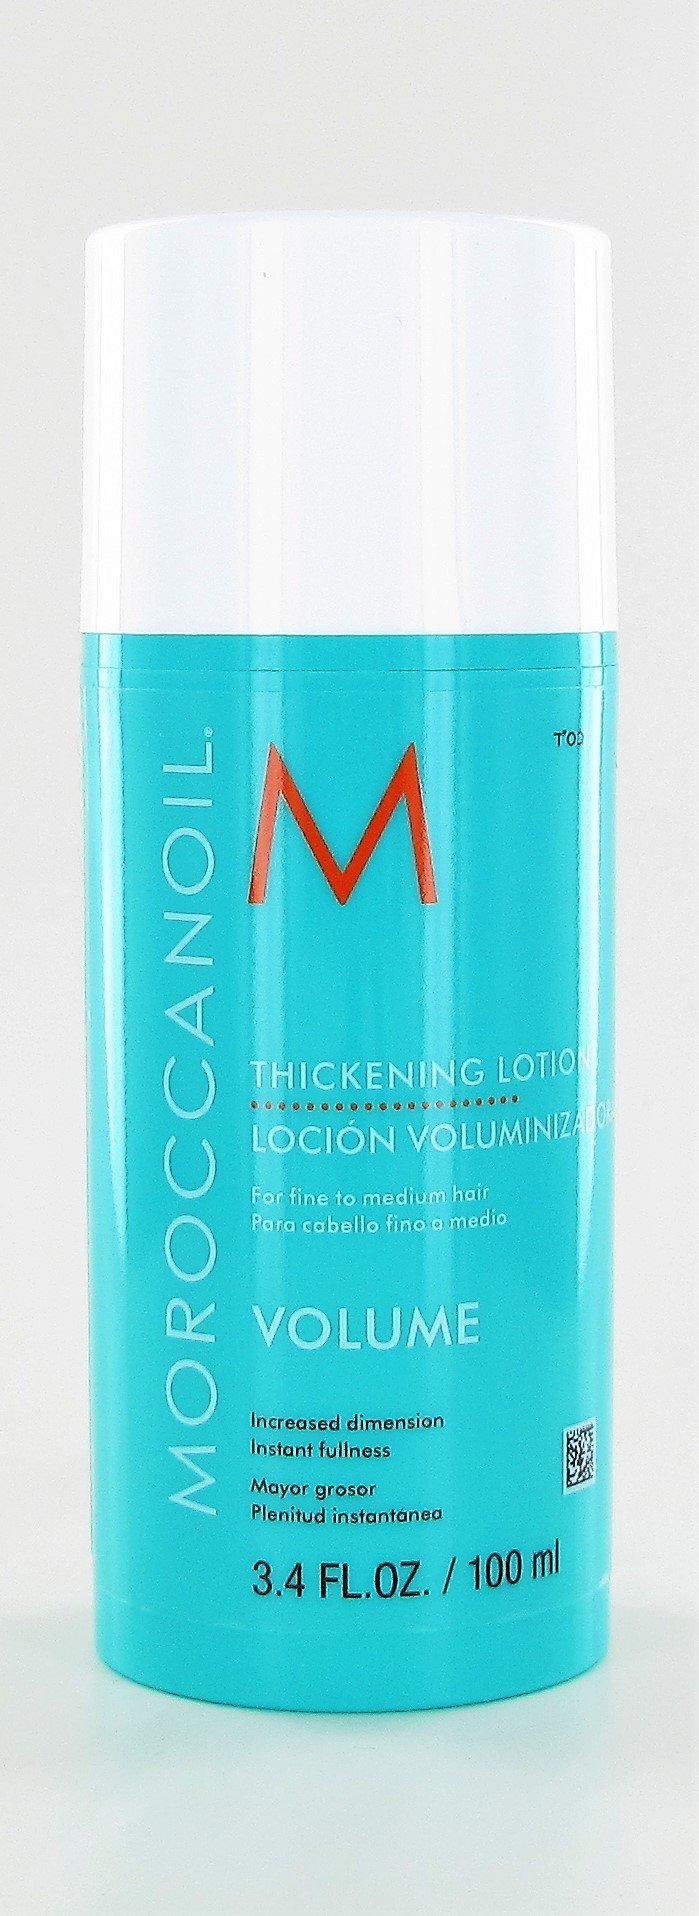 MoroccanOil Volume Thickening Lotion 3.4 oz